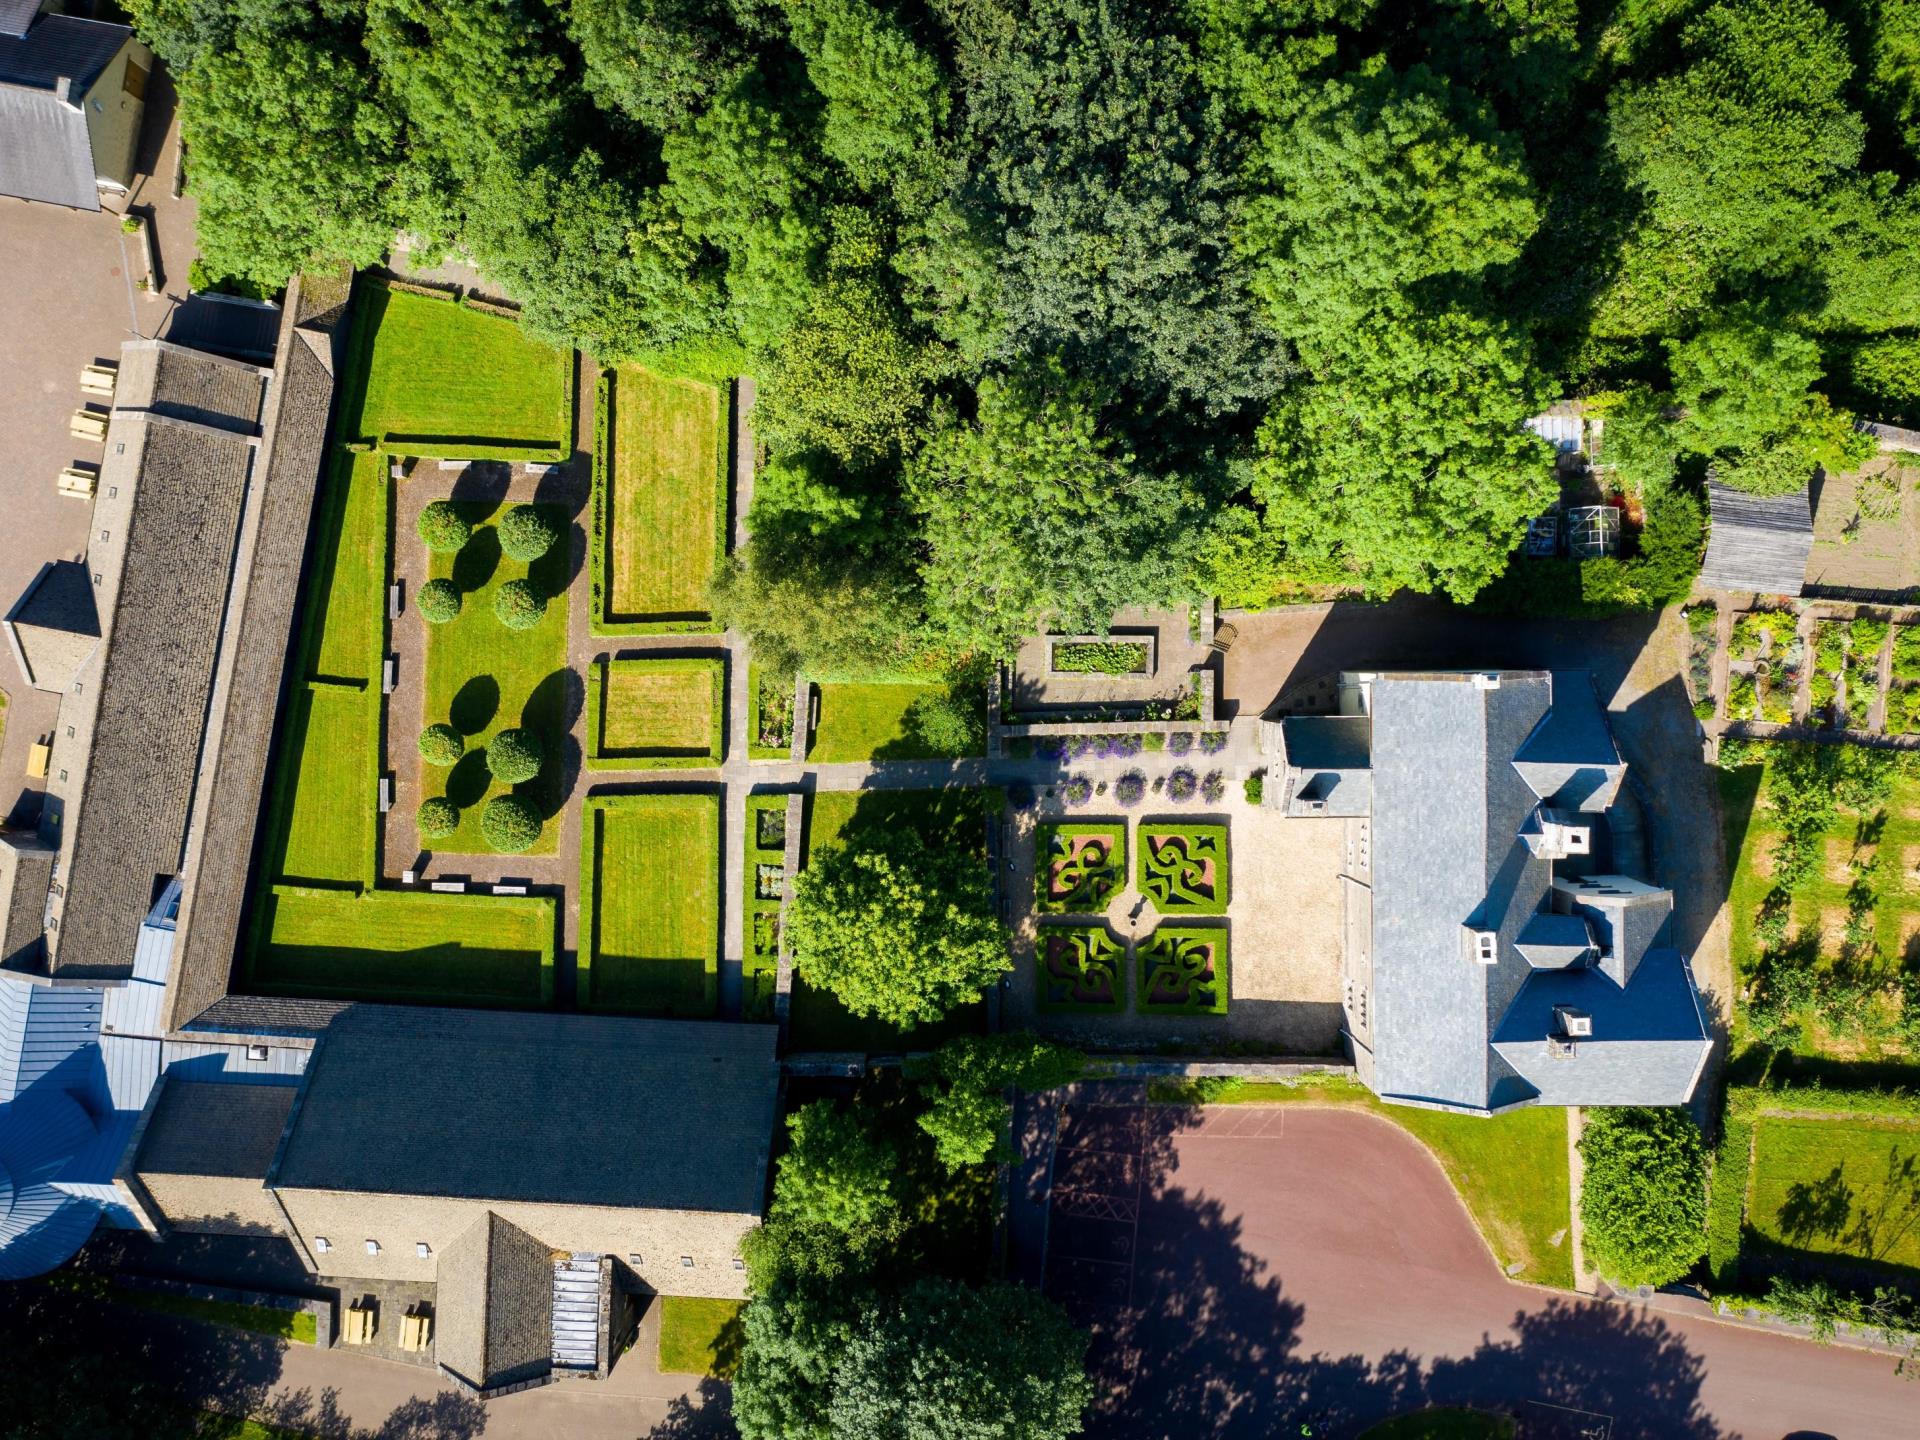 Aerial view of Llancaiach Fawr Manor and gardens